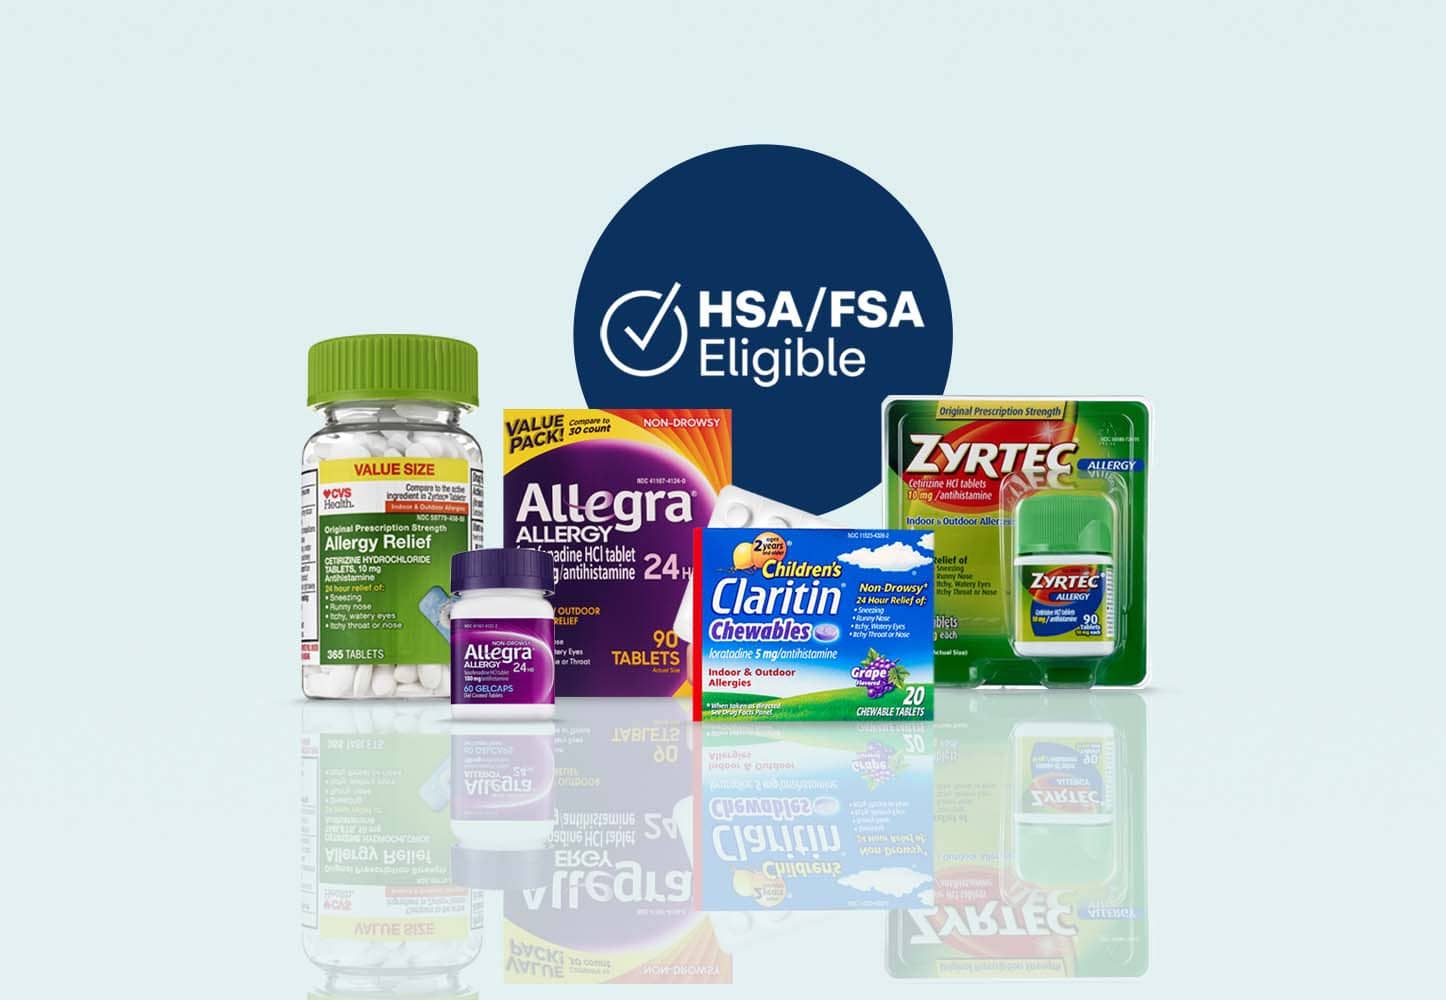 HSA/FSA eligible logo and products examples.